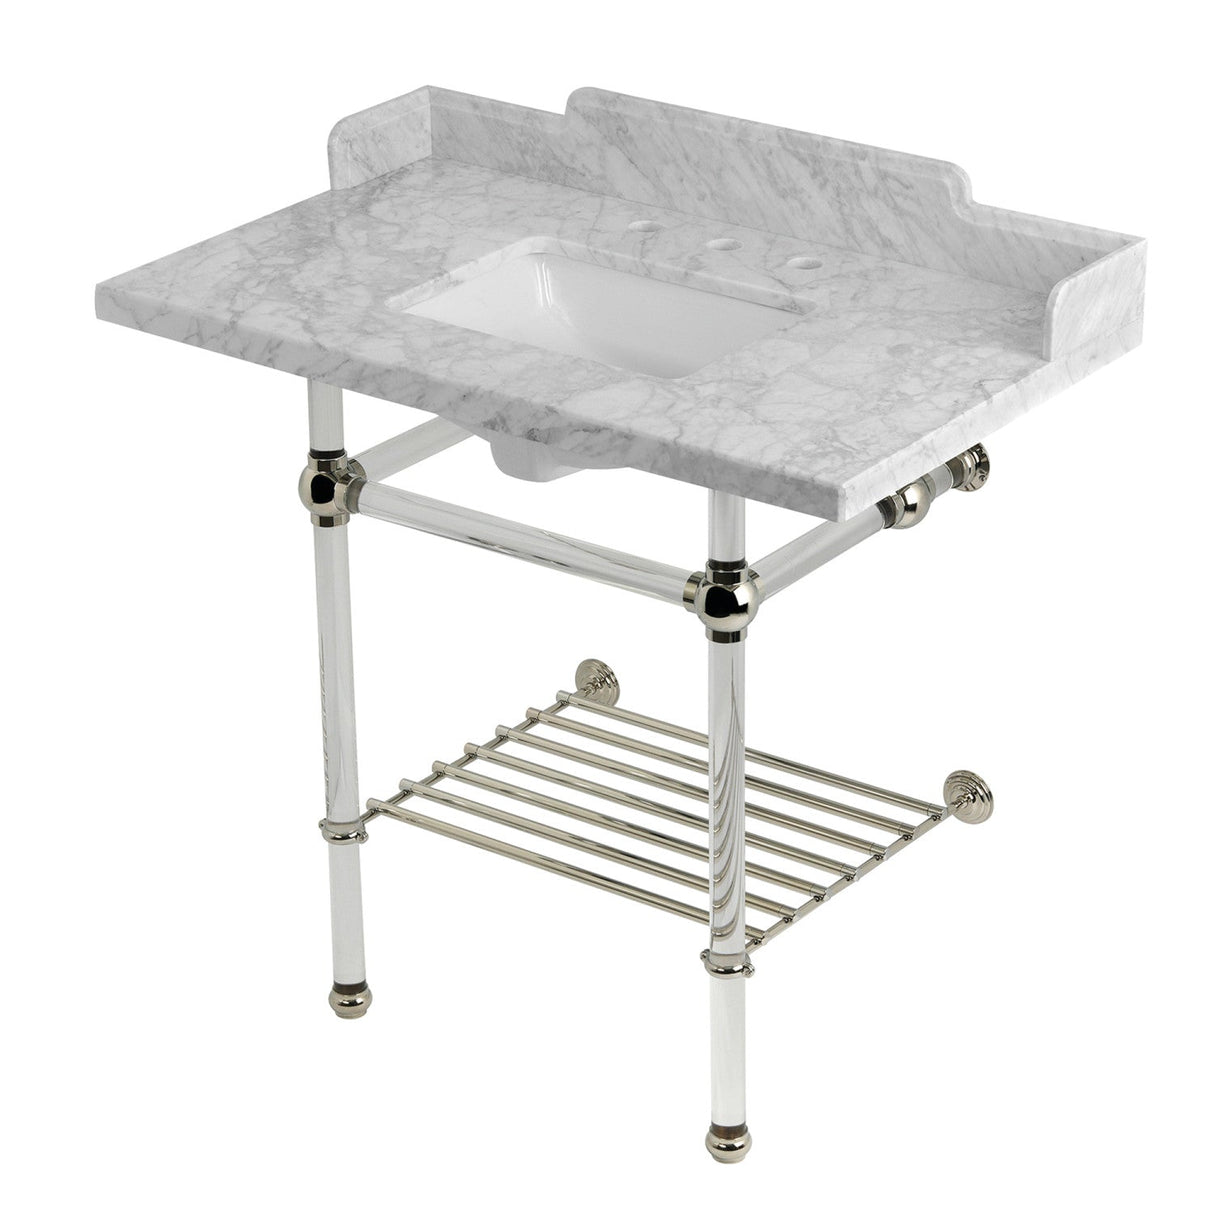 Pemberton LMS36MASQB6 36-Inch Console Sink with Acrylic Legs (8-Inch, 3 Hole), Marble White/Polished Nickel